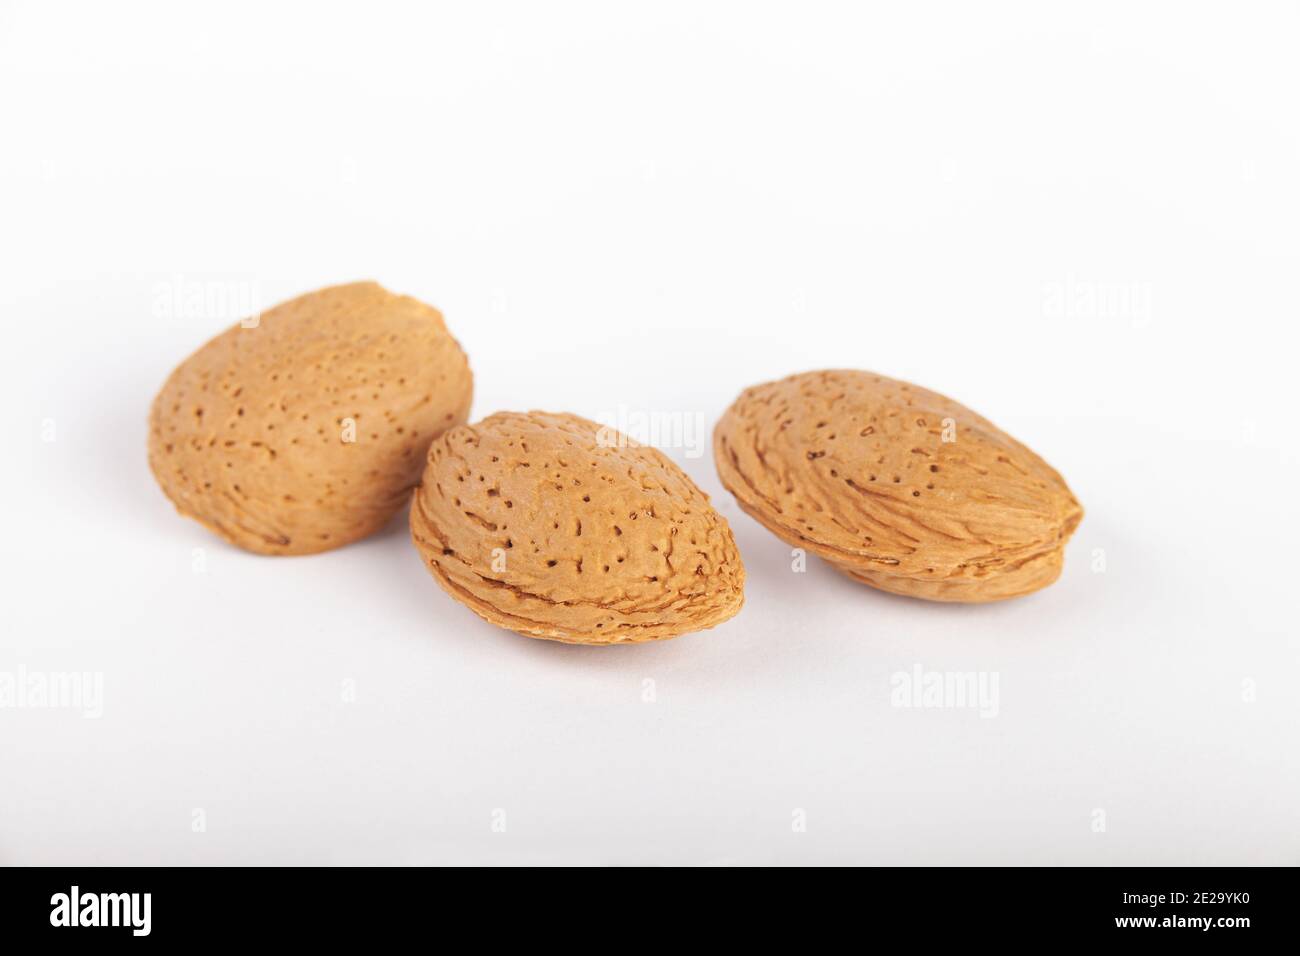 Three almond nuts in their shells Stock Photo